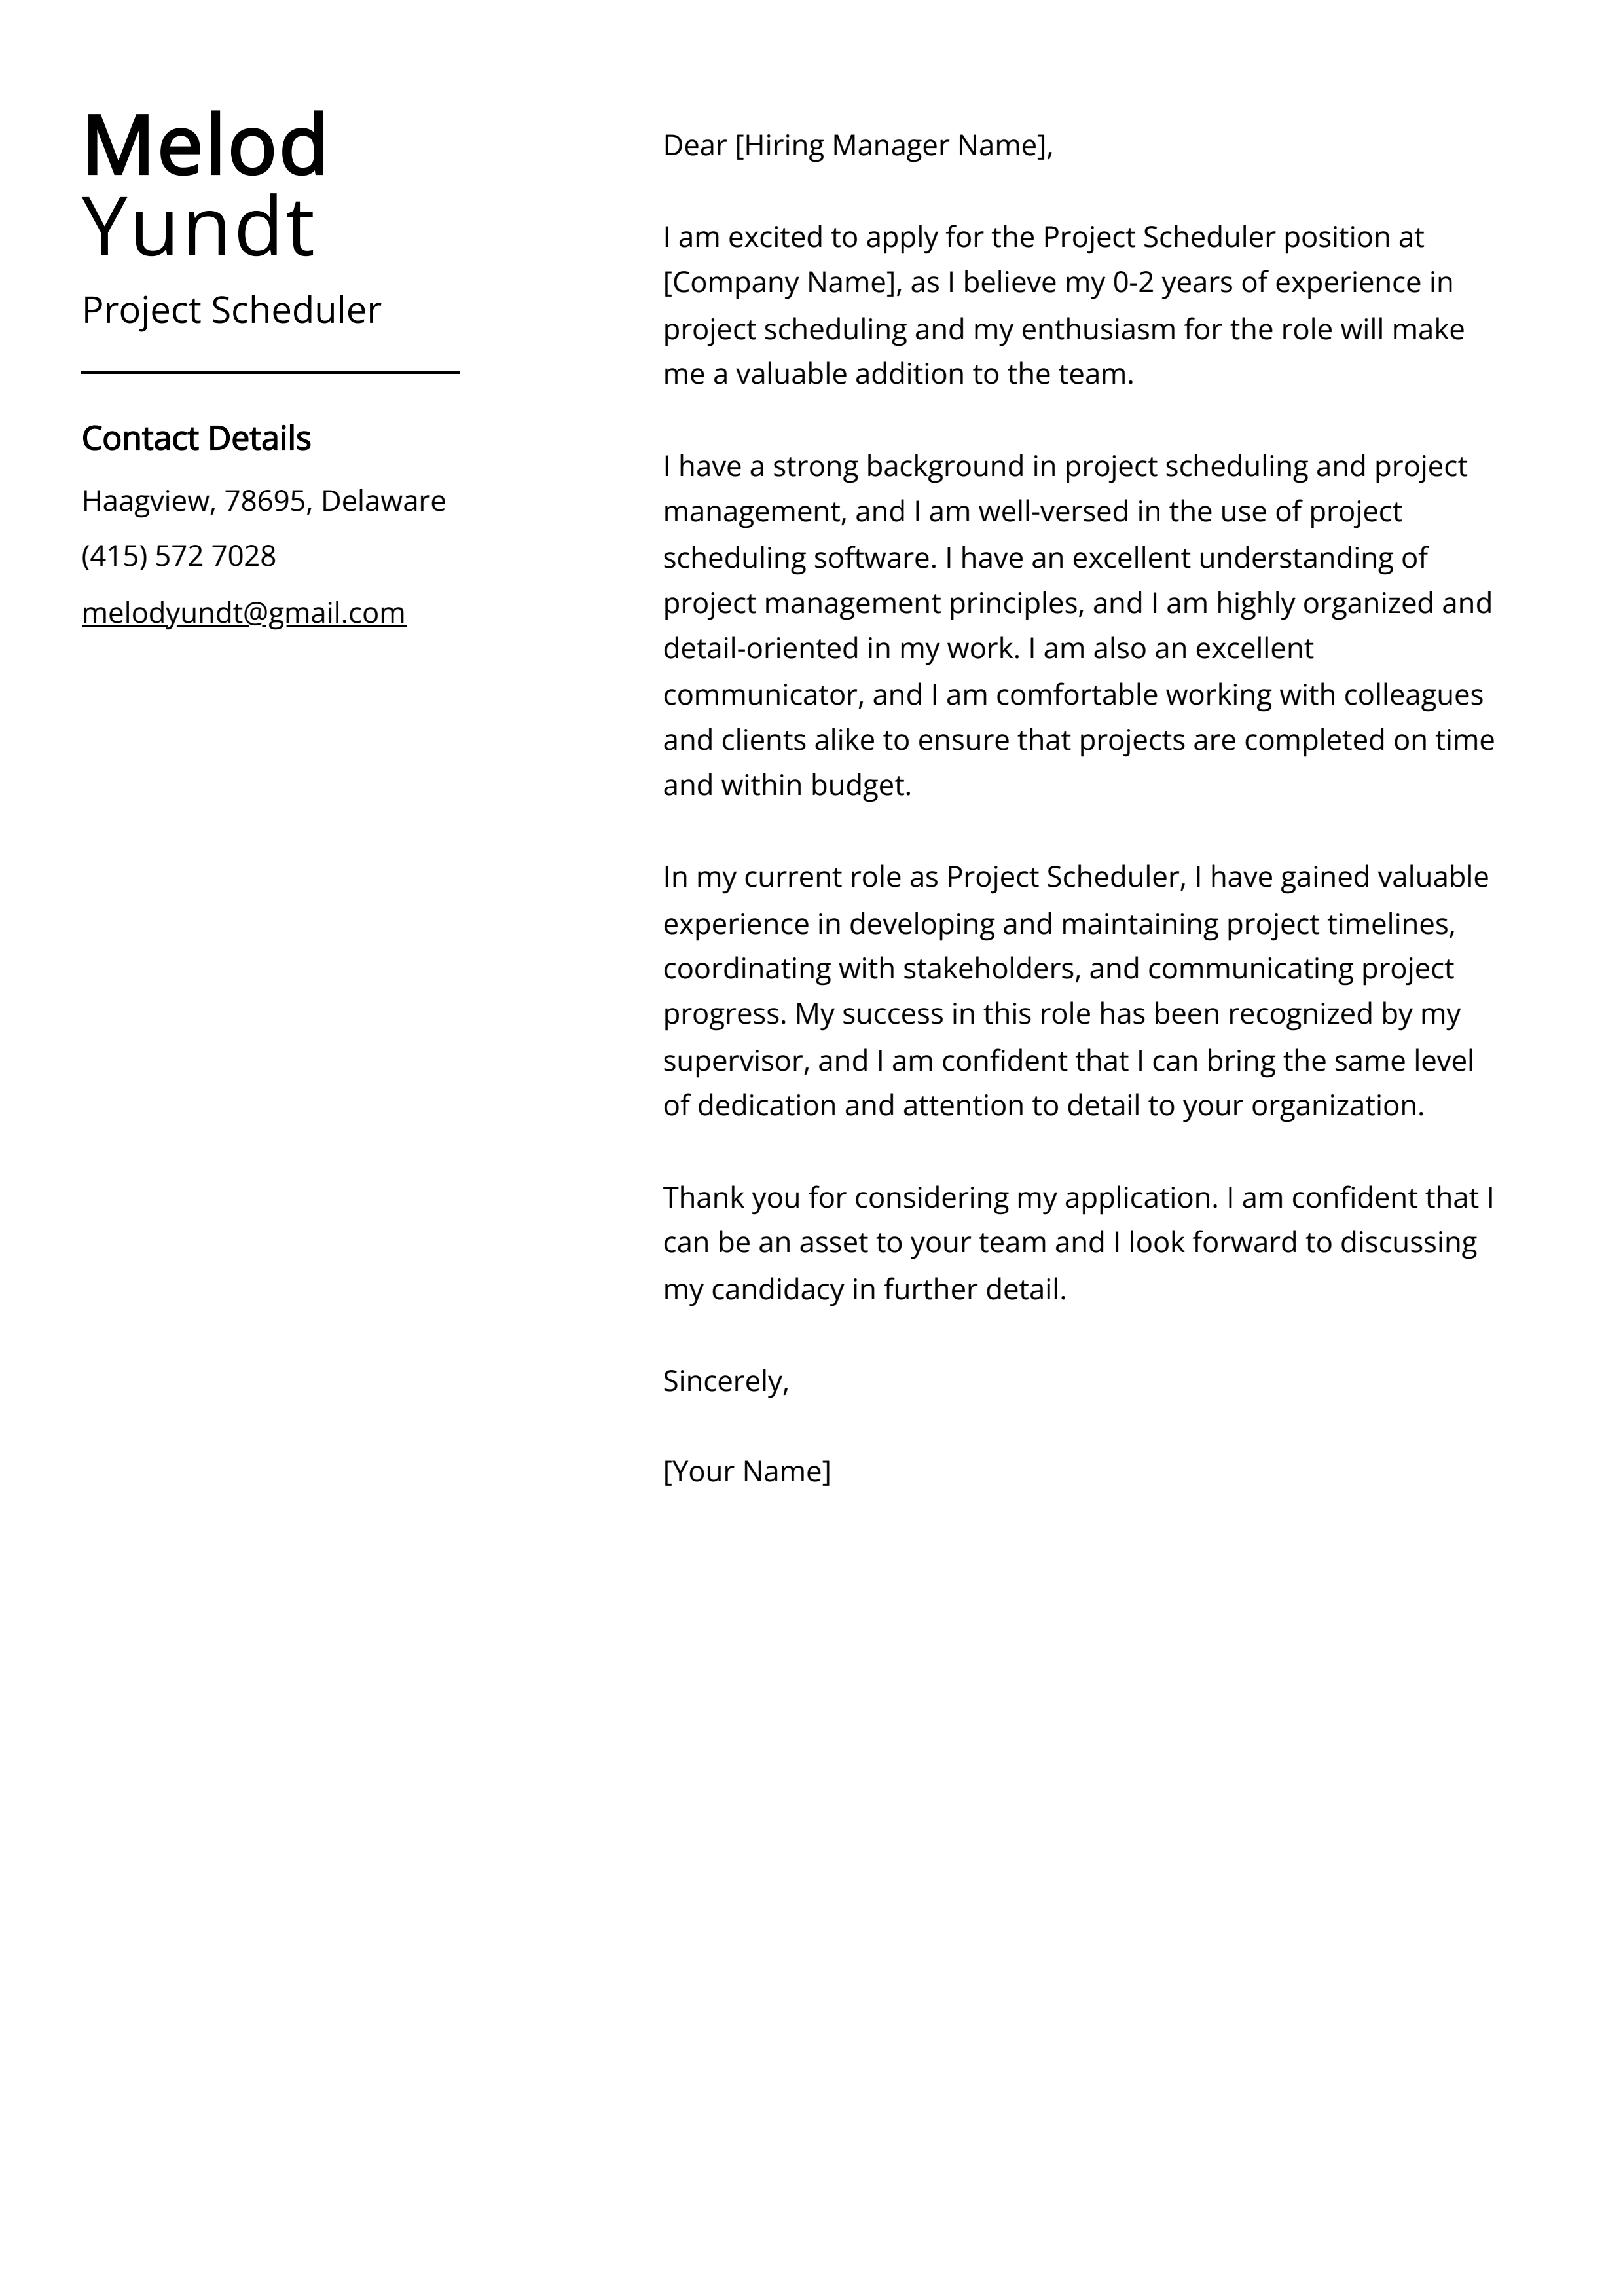 Project Scheduler Cover Letter Example